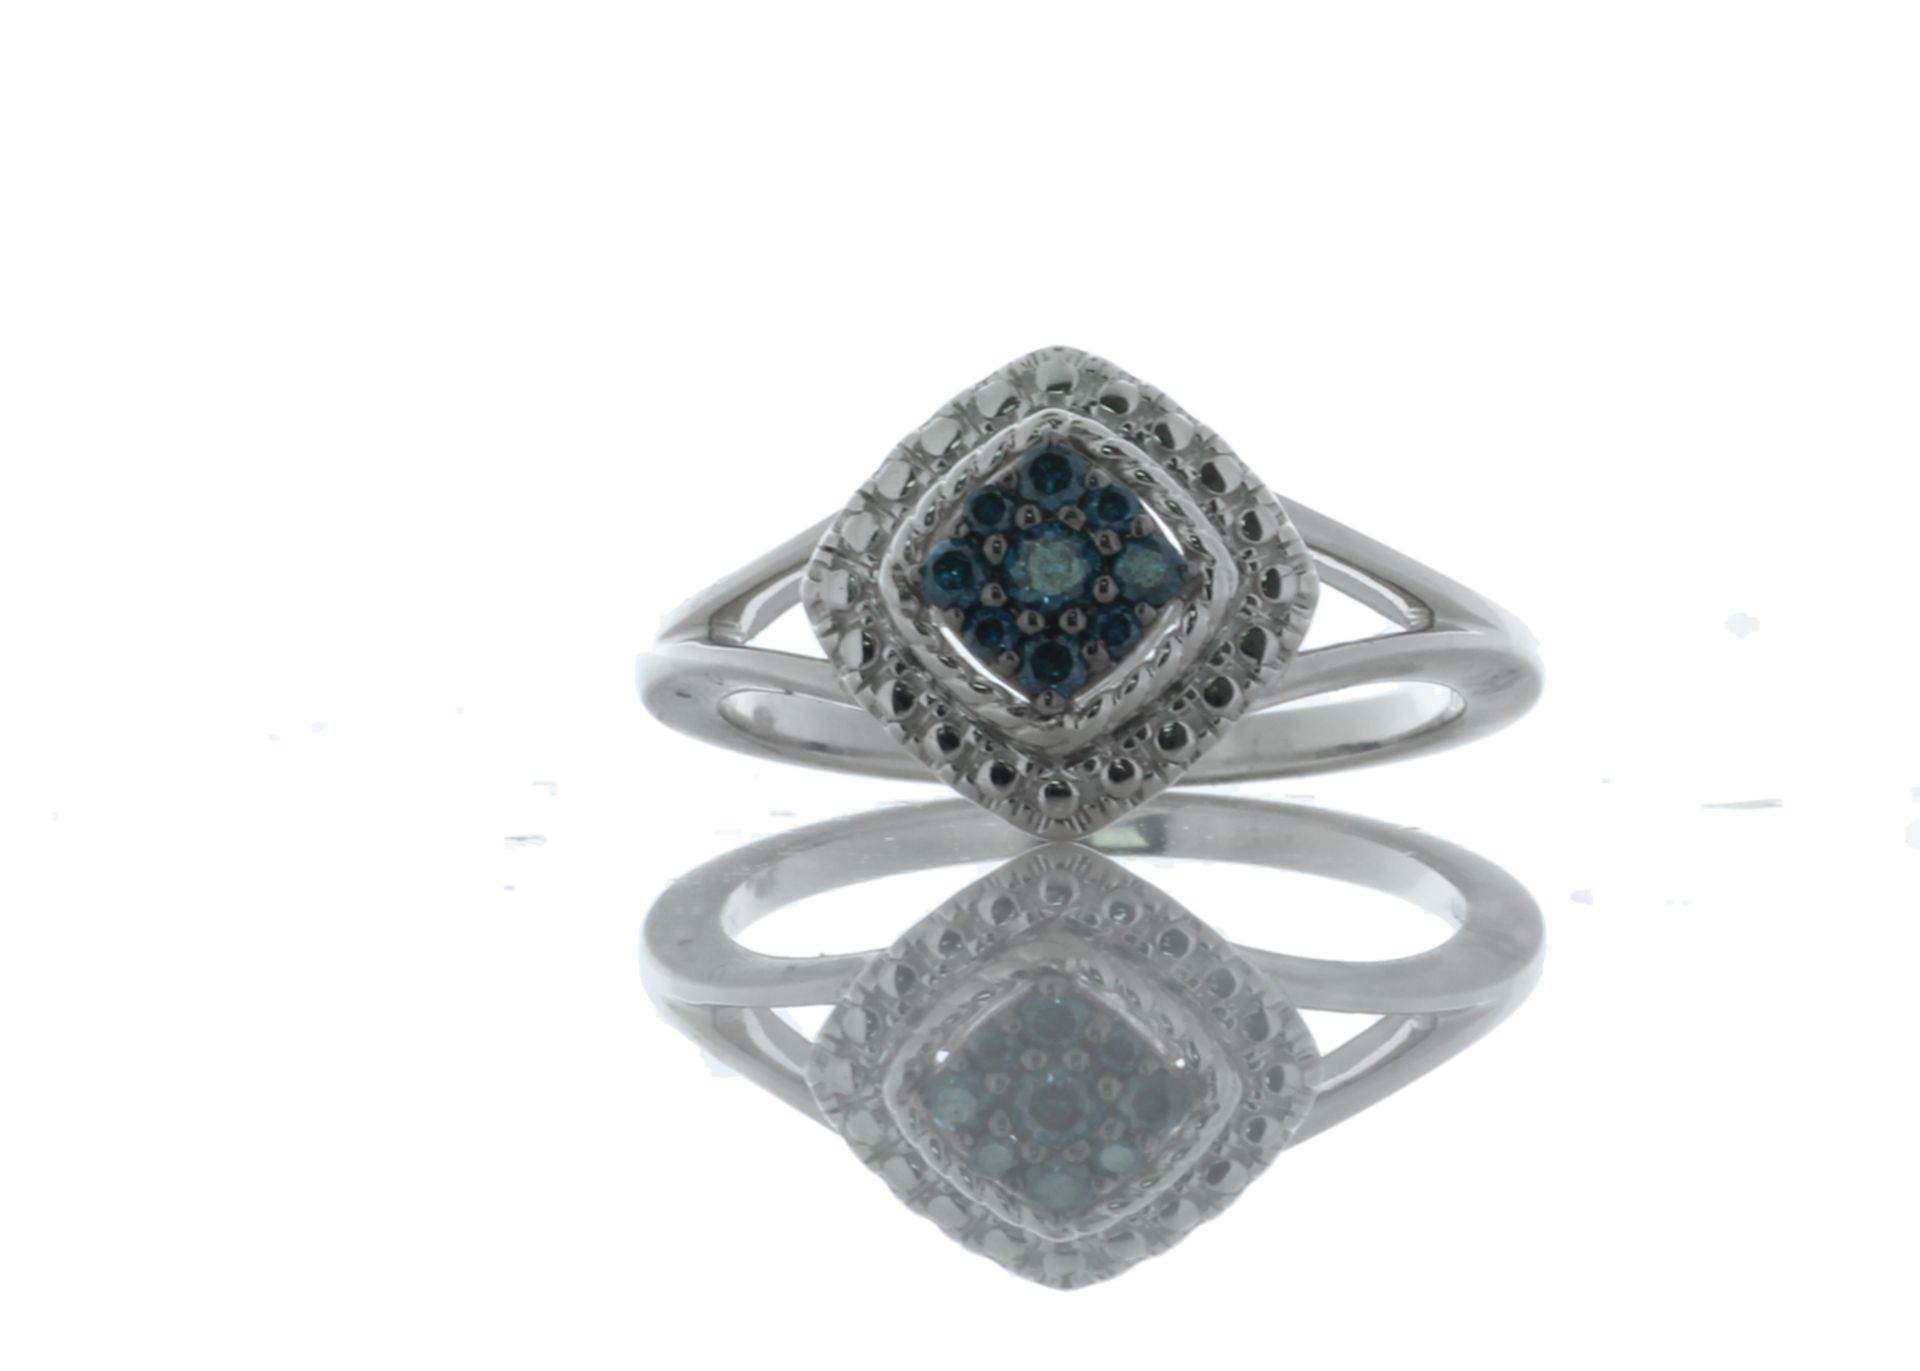 9ct White Gold Diamond Ring 0.15 Carats - Valued By GIE £3,475.00 - Nine Round brilliant blue